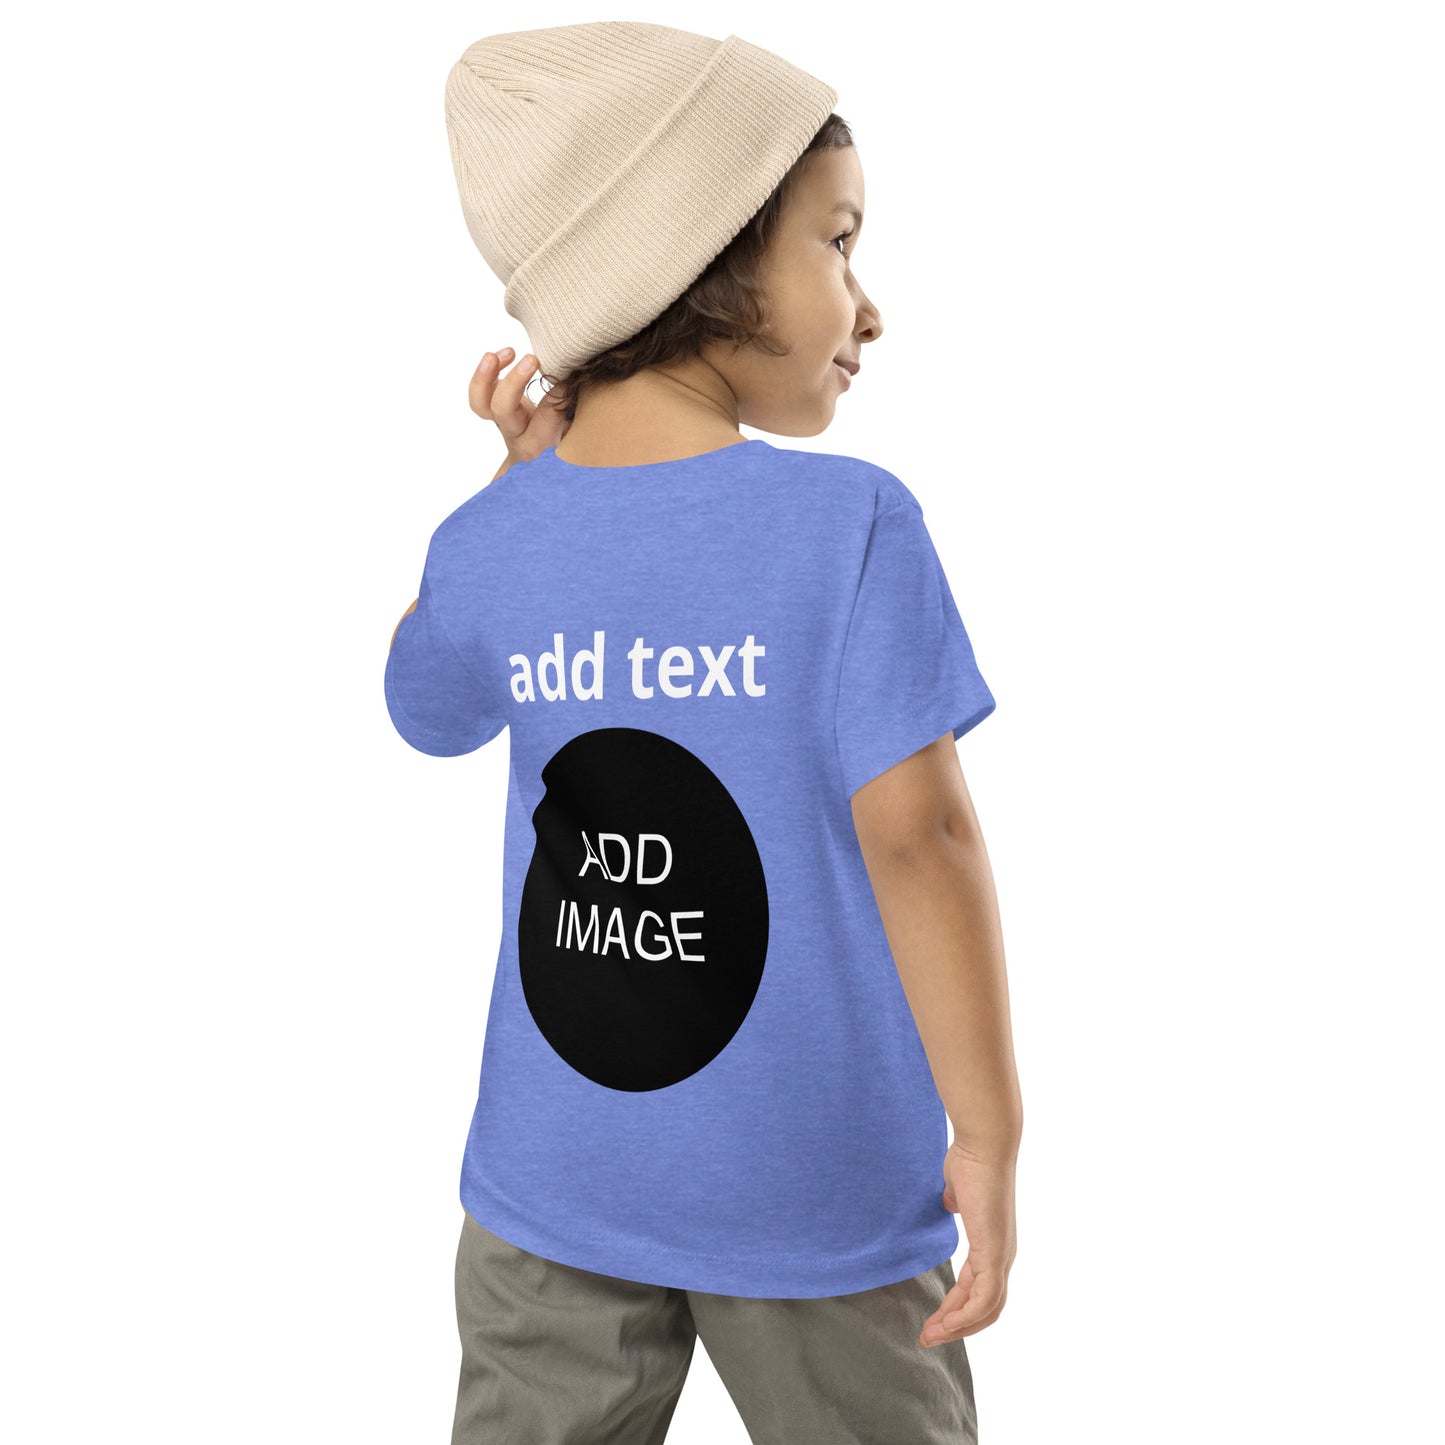 Toddler Short Sleeve Tee 2T-5T (back image & text)